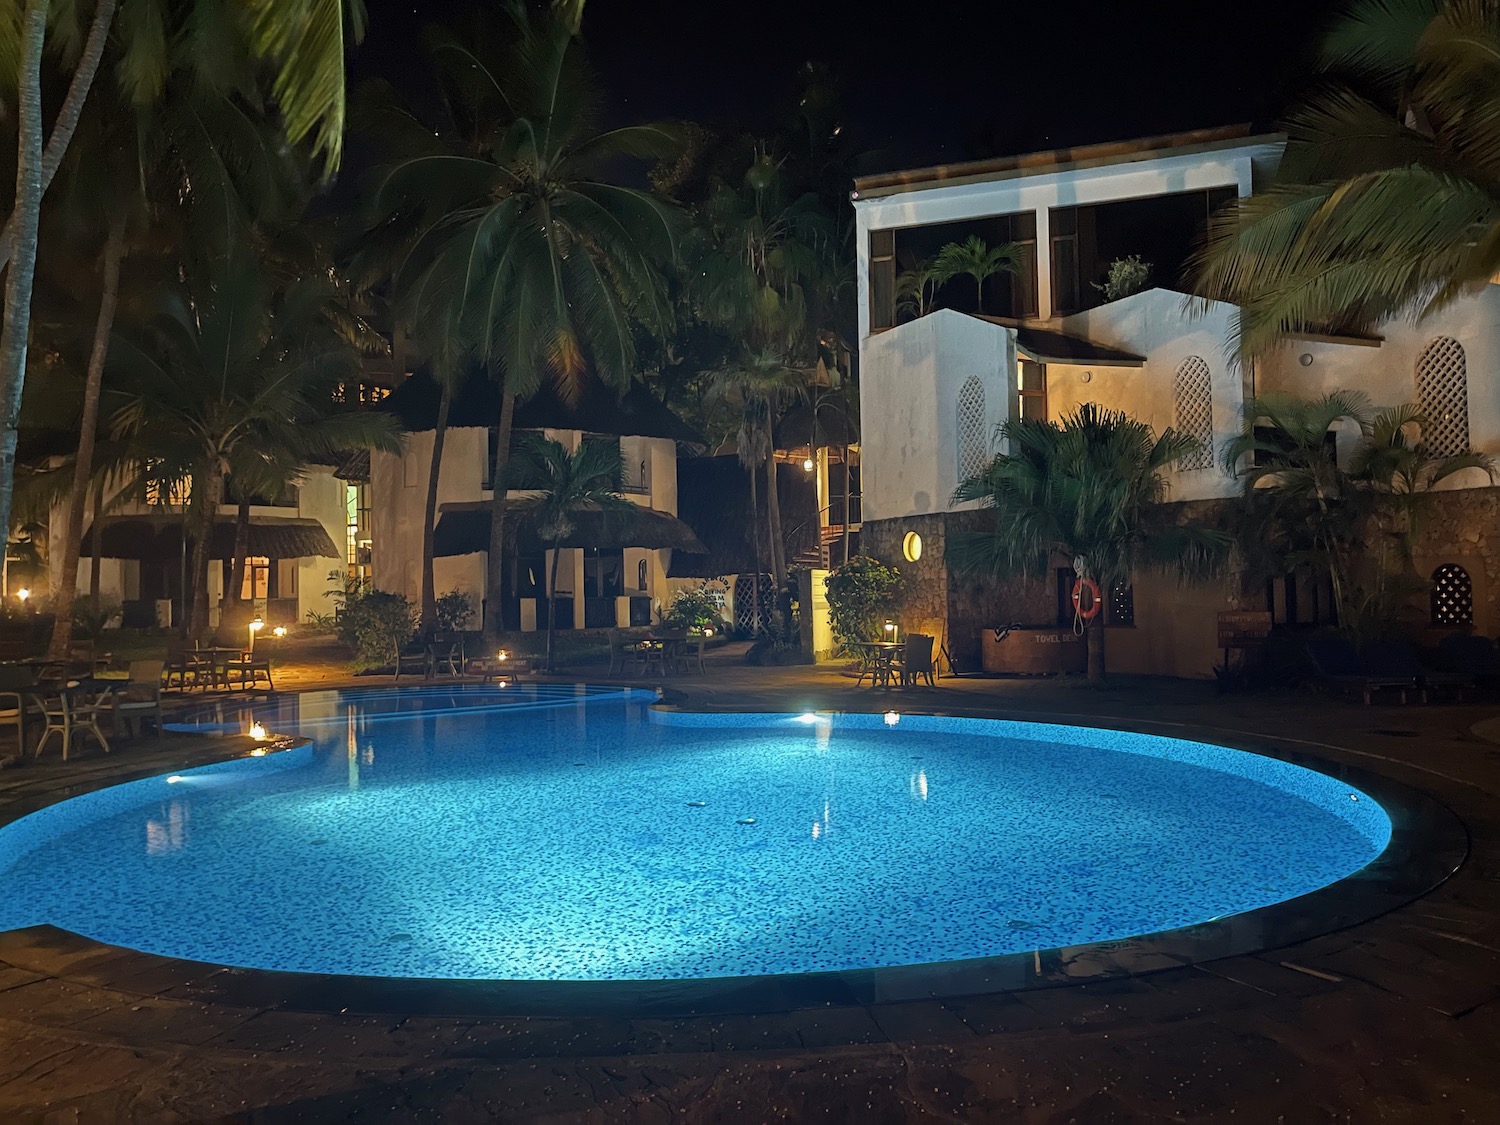 a pool with palm trees and buildings at night